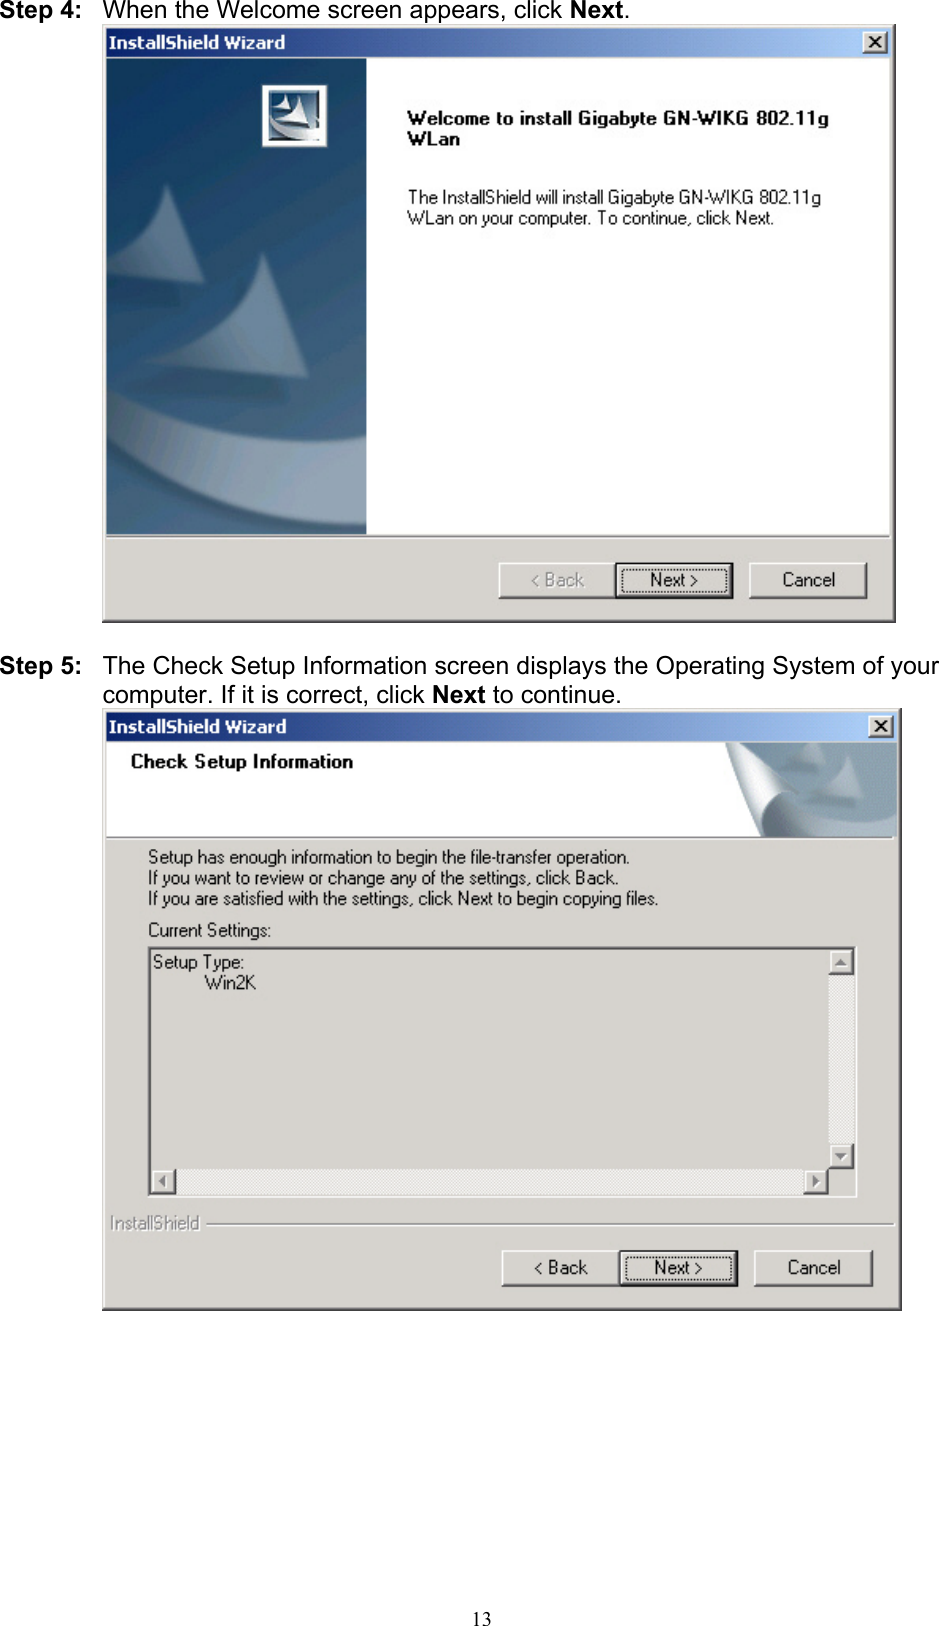 13  Step 4:  When the Welcome screen appears, click Next.   Step 5:  The Check Setup Information screen displays the Operating System of your computer. If it is correct, click Next to continue.     